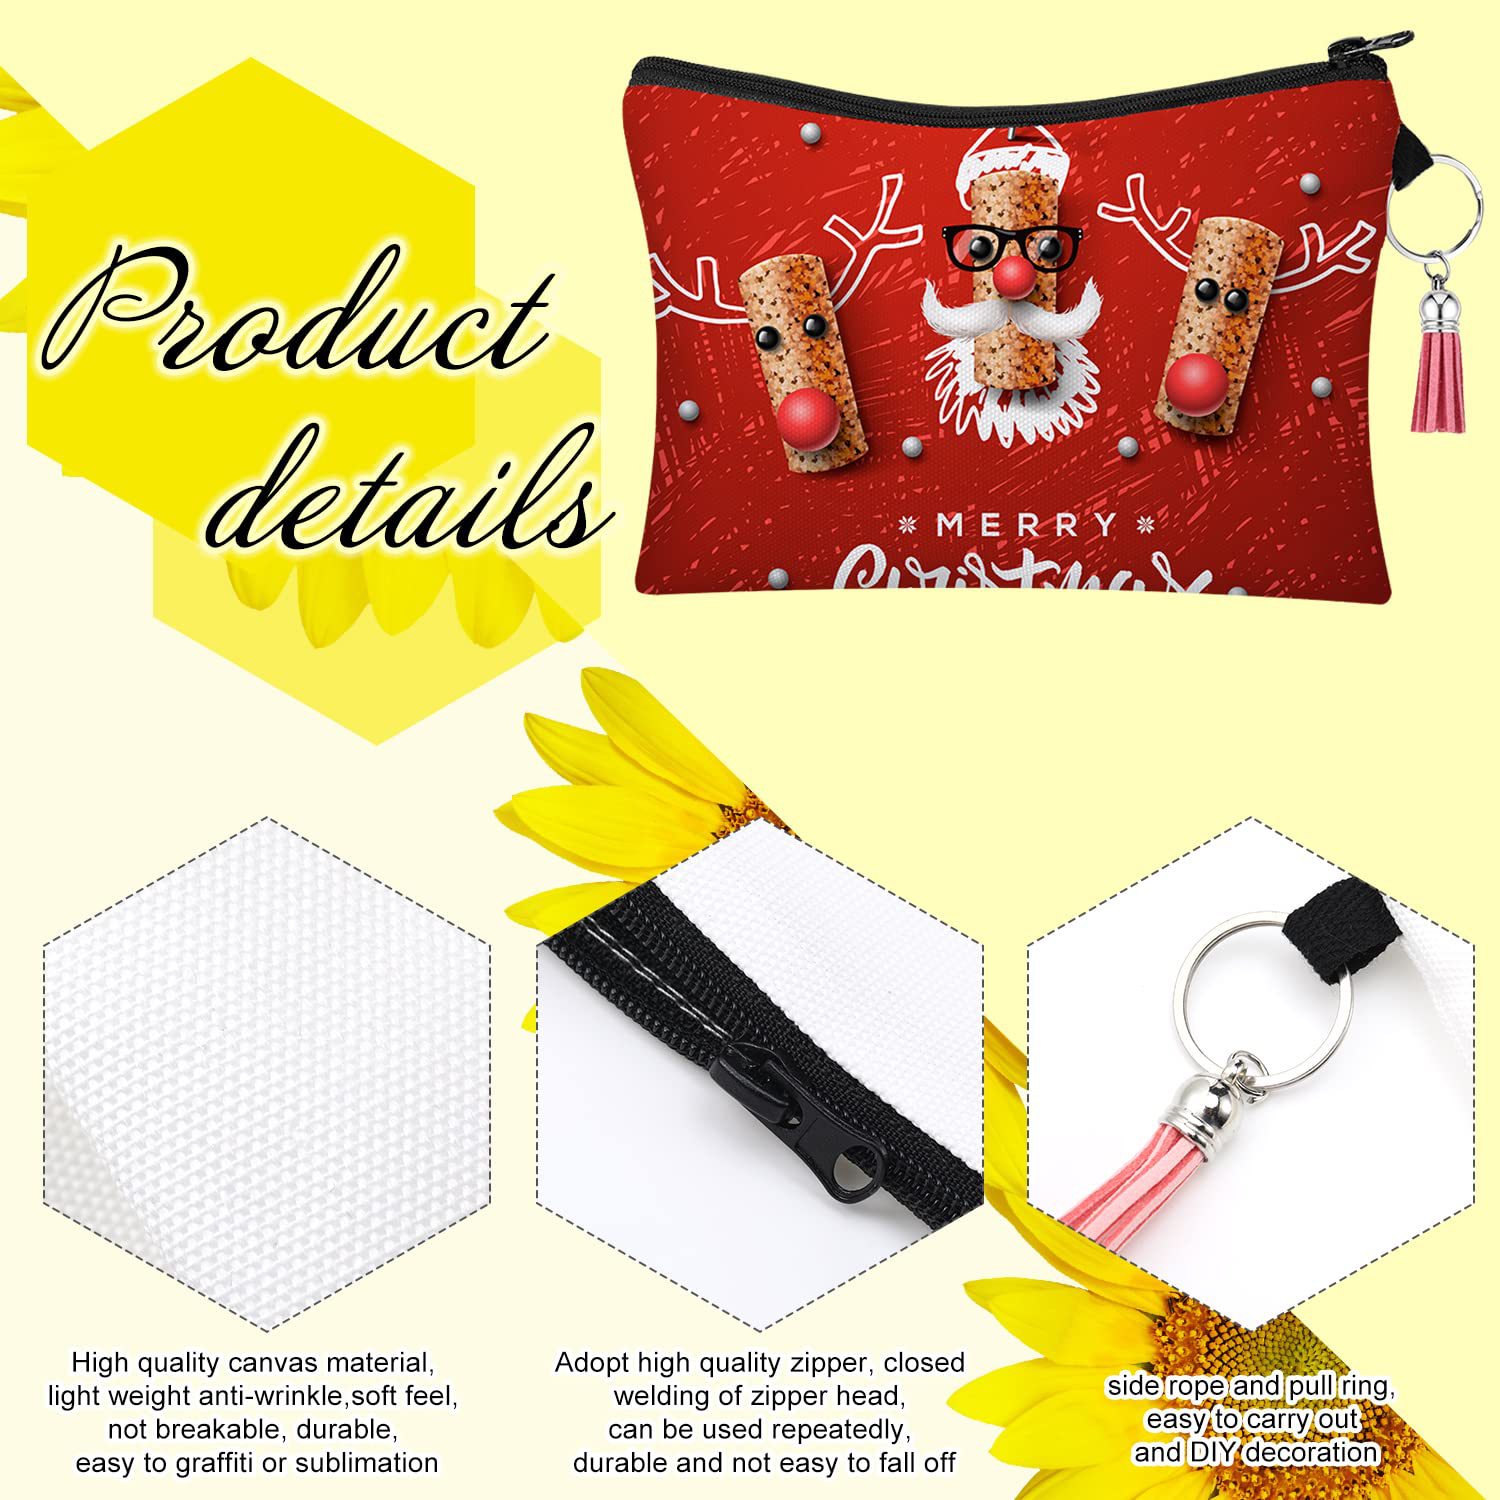 DHLSublimation Blank Cosmetic Bags Set Including DIY Heat Transfer Makeup Bags with Zipper, Keychains, Tassels, Jump Rings for DIY